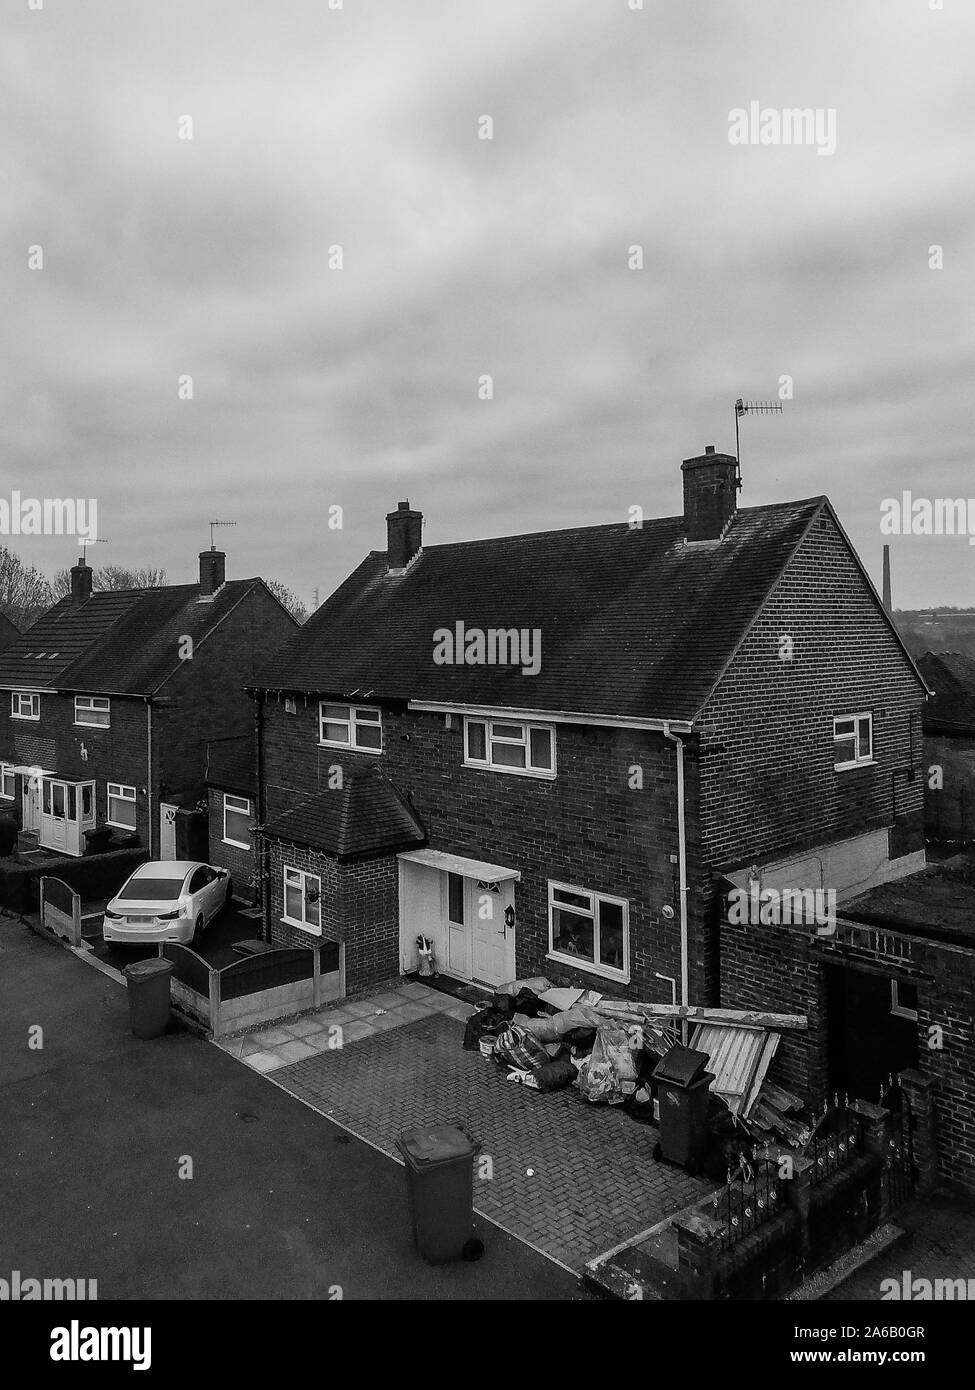 Aerial view of the poverty stricken area of Tunstall and Chell Heath in Stoke on Trent, streets after of terraced housing in urban decline, poor area Stock Photo